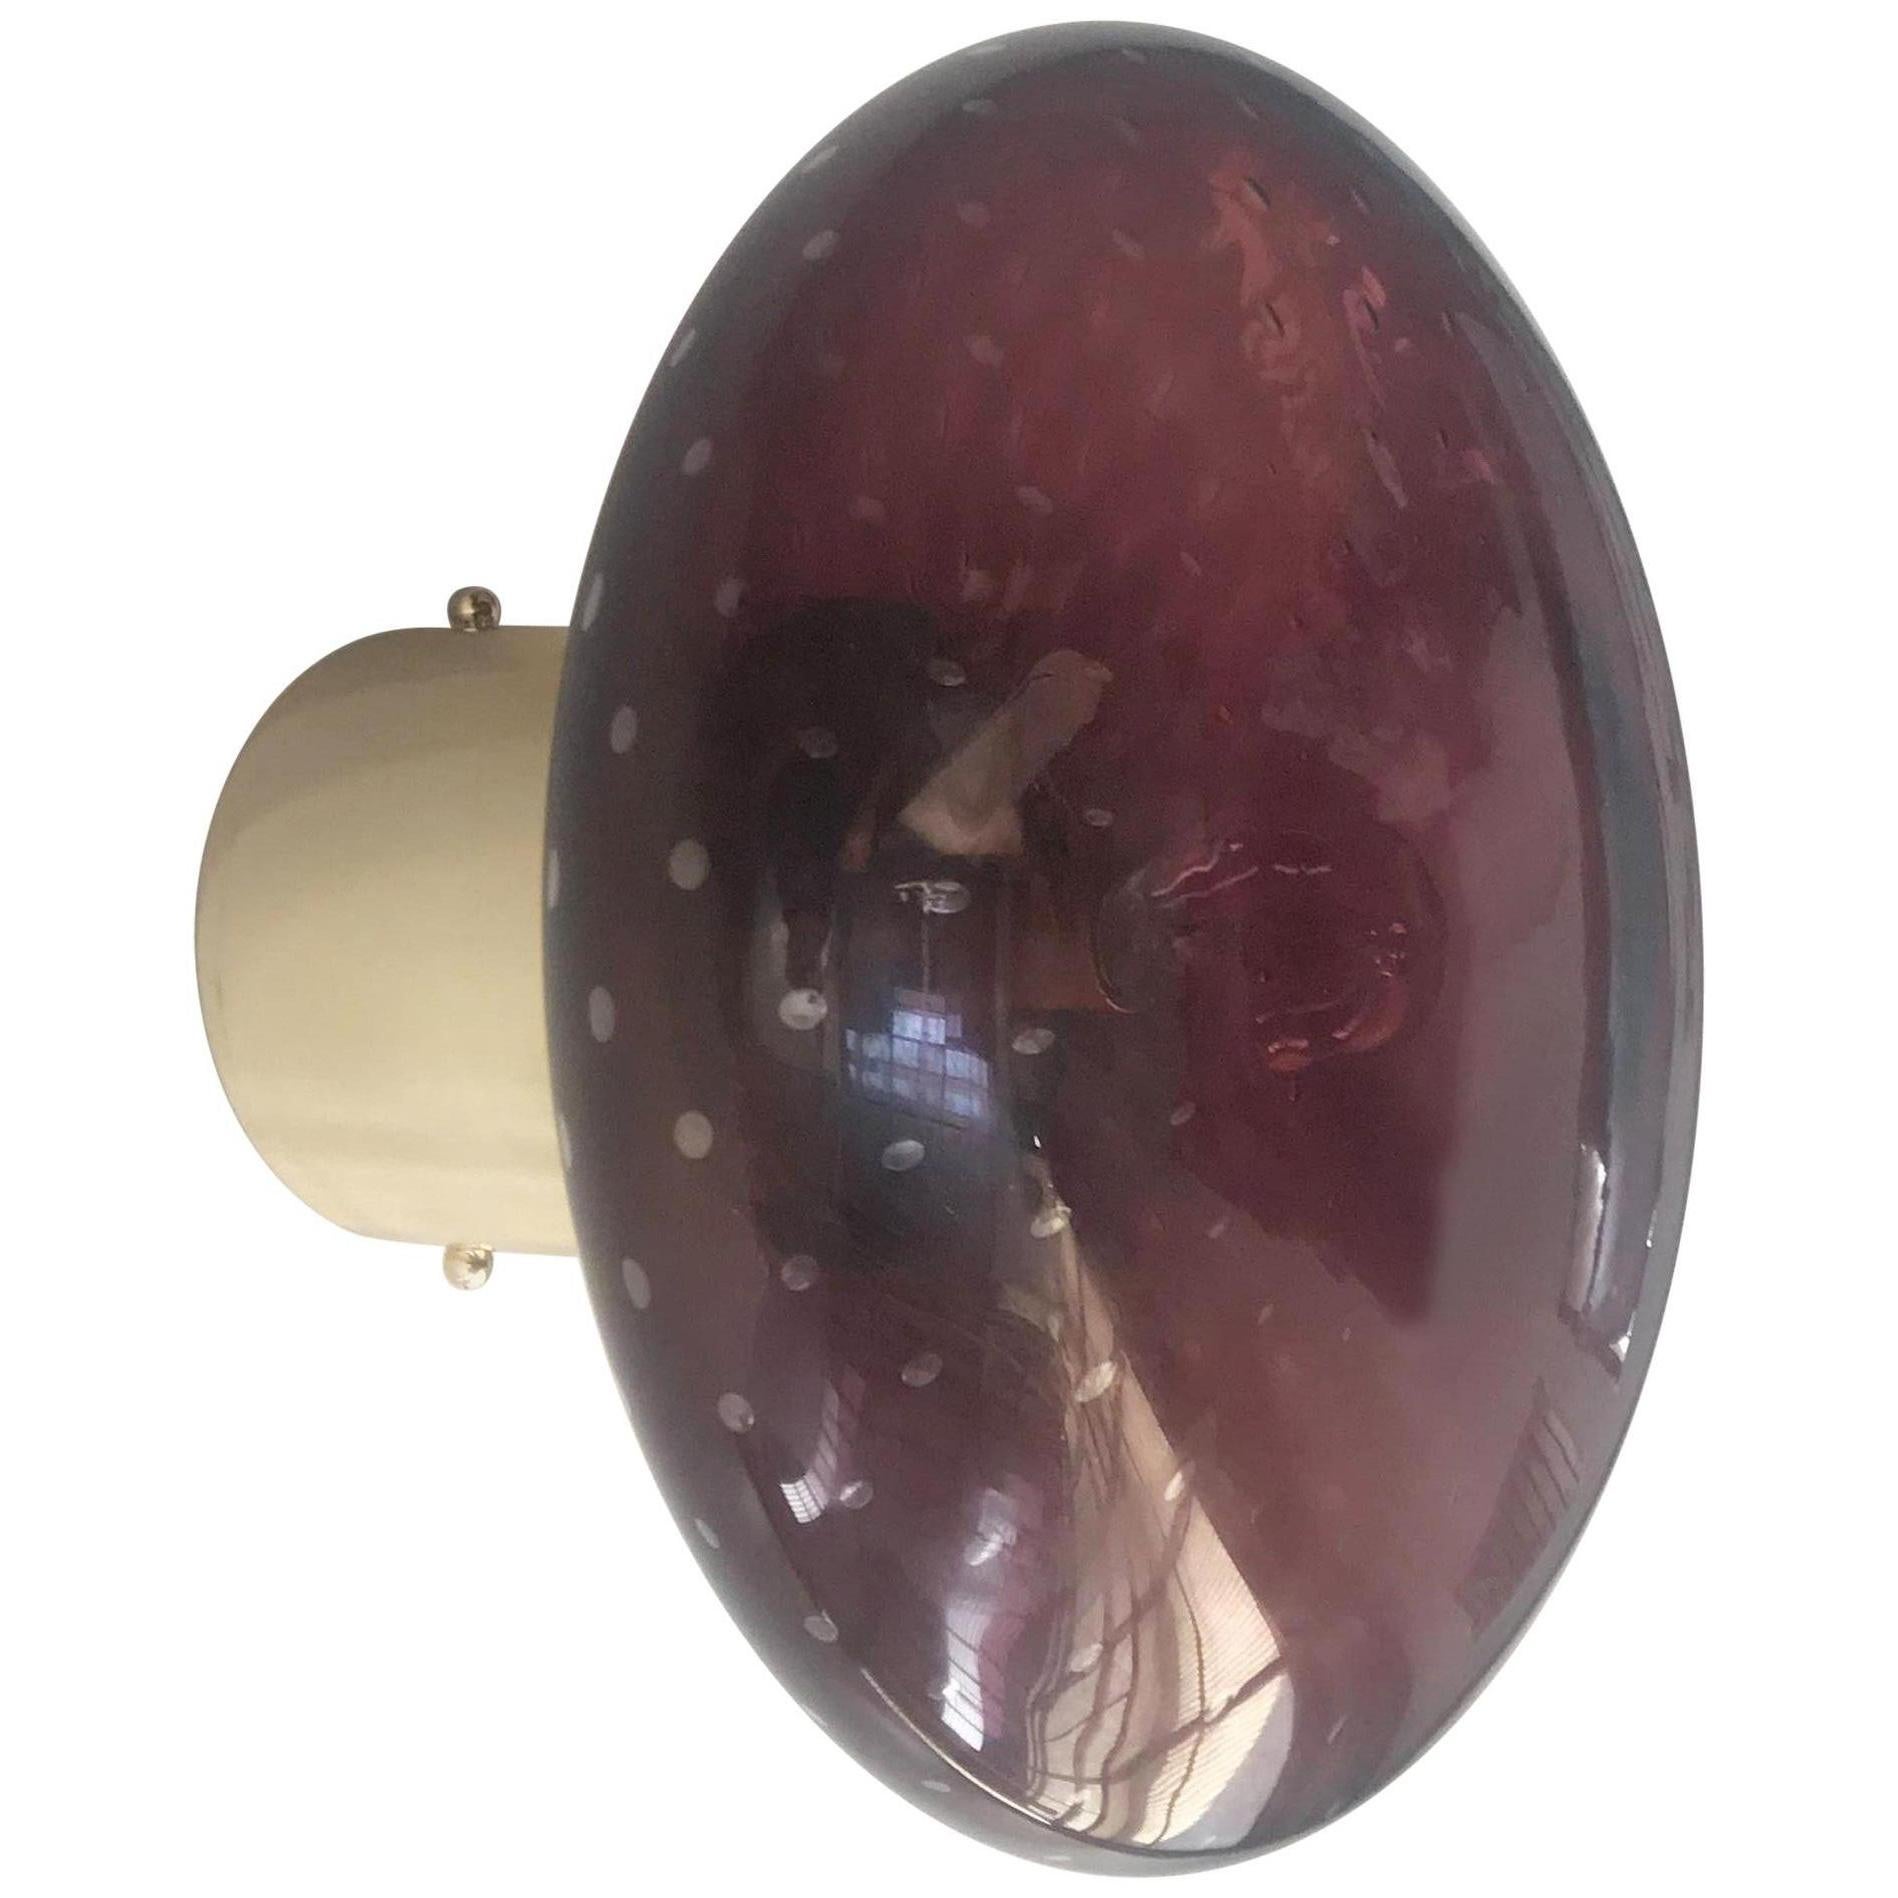 Italian flush mount with Murano glass shade and brass frame / Made in Italy
Designed by Fabio Ltd, inspired by Angelo Lelli and Arredoluce styles
1 light / E12 or E14 type / max 40W each
Diameter: 12 inches / Height: 9.5 inches
Order only / This